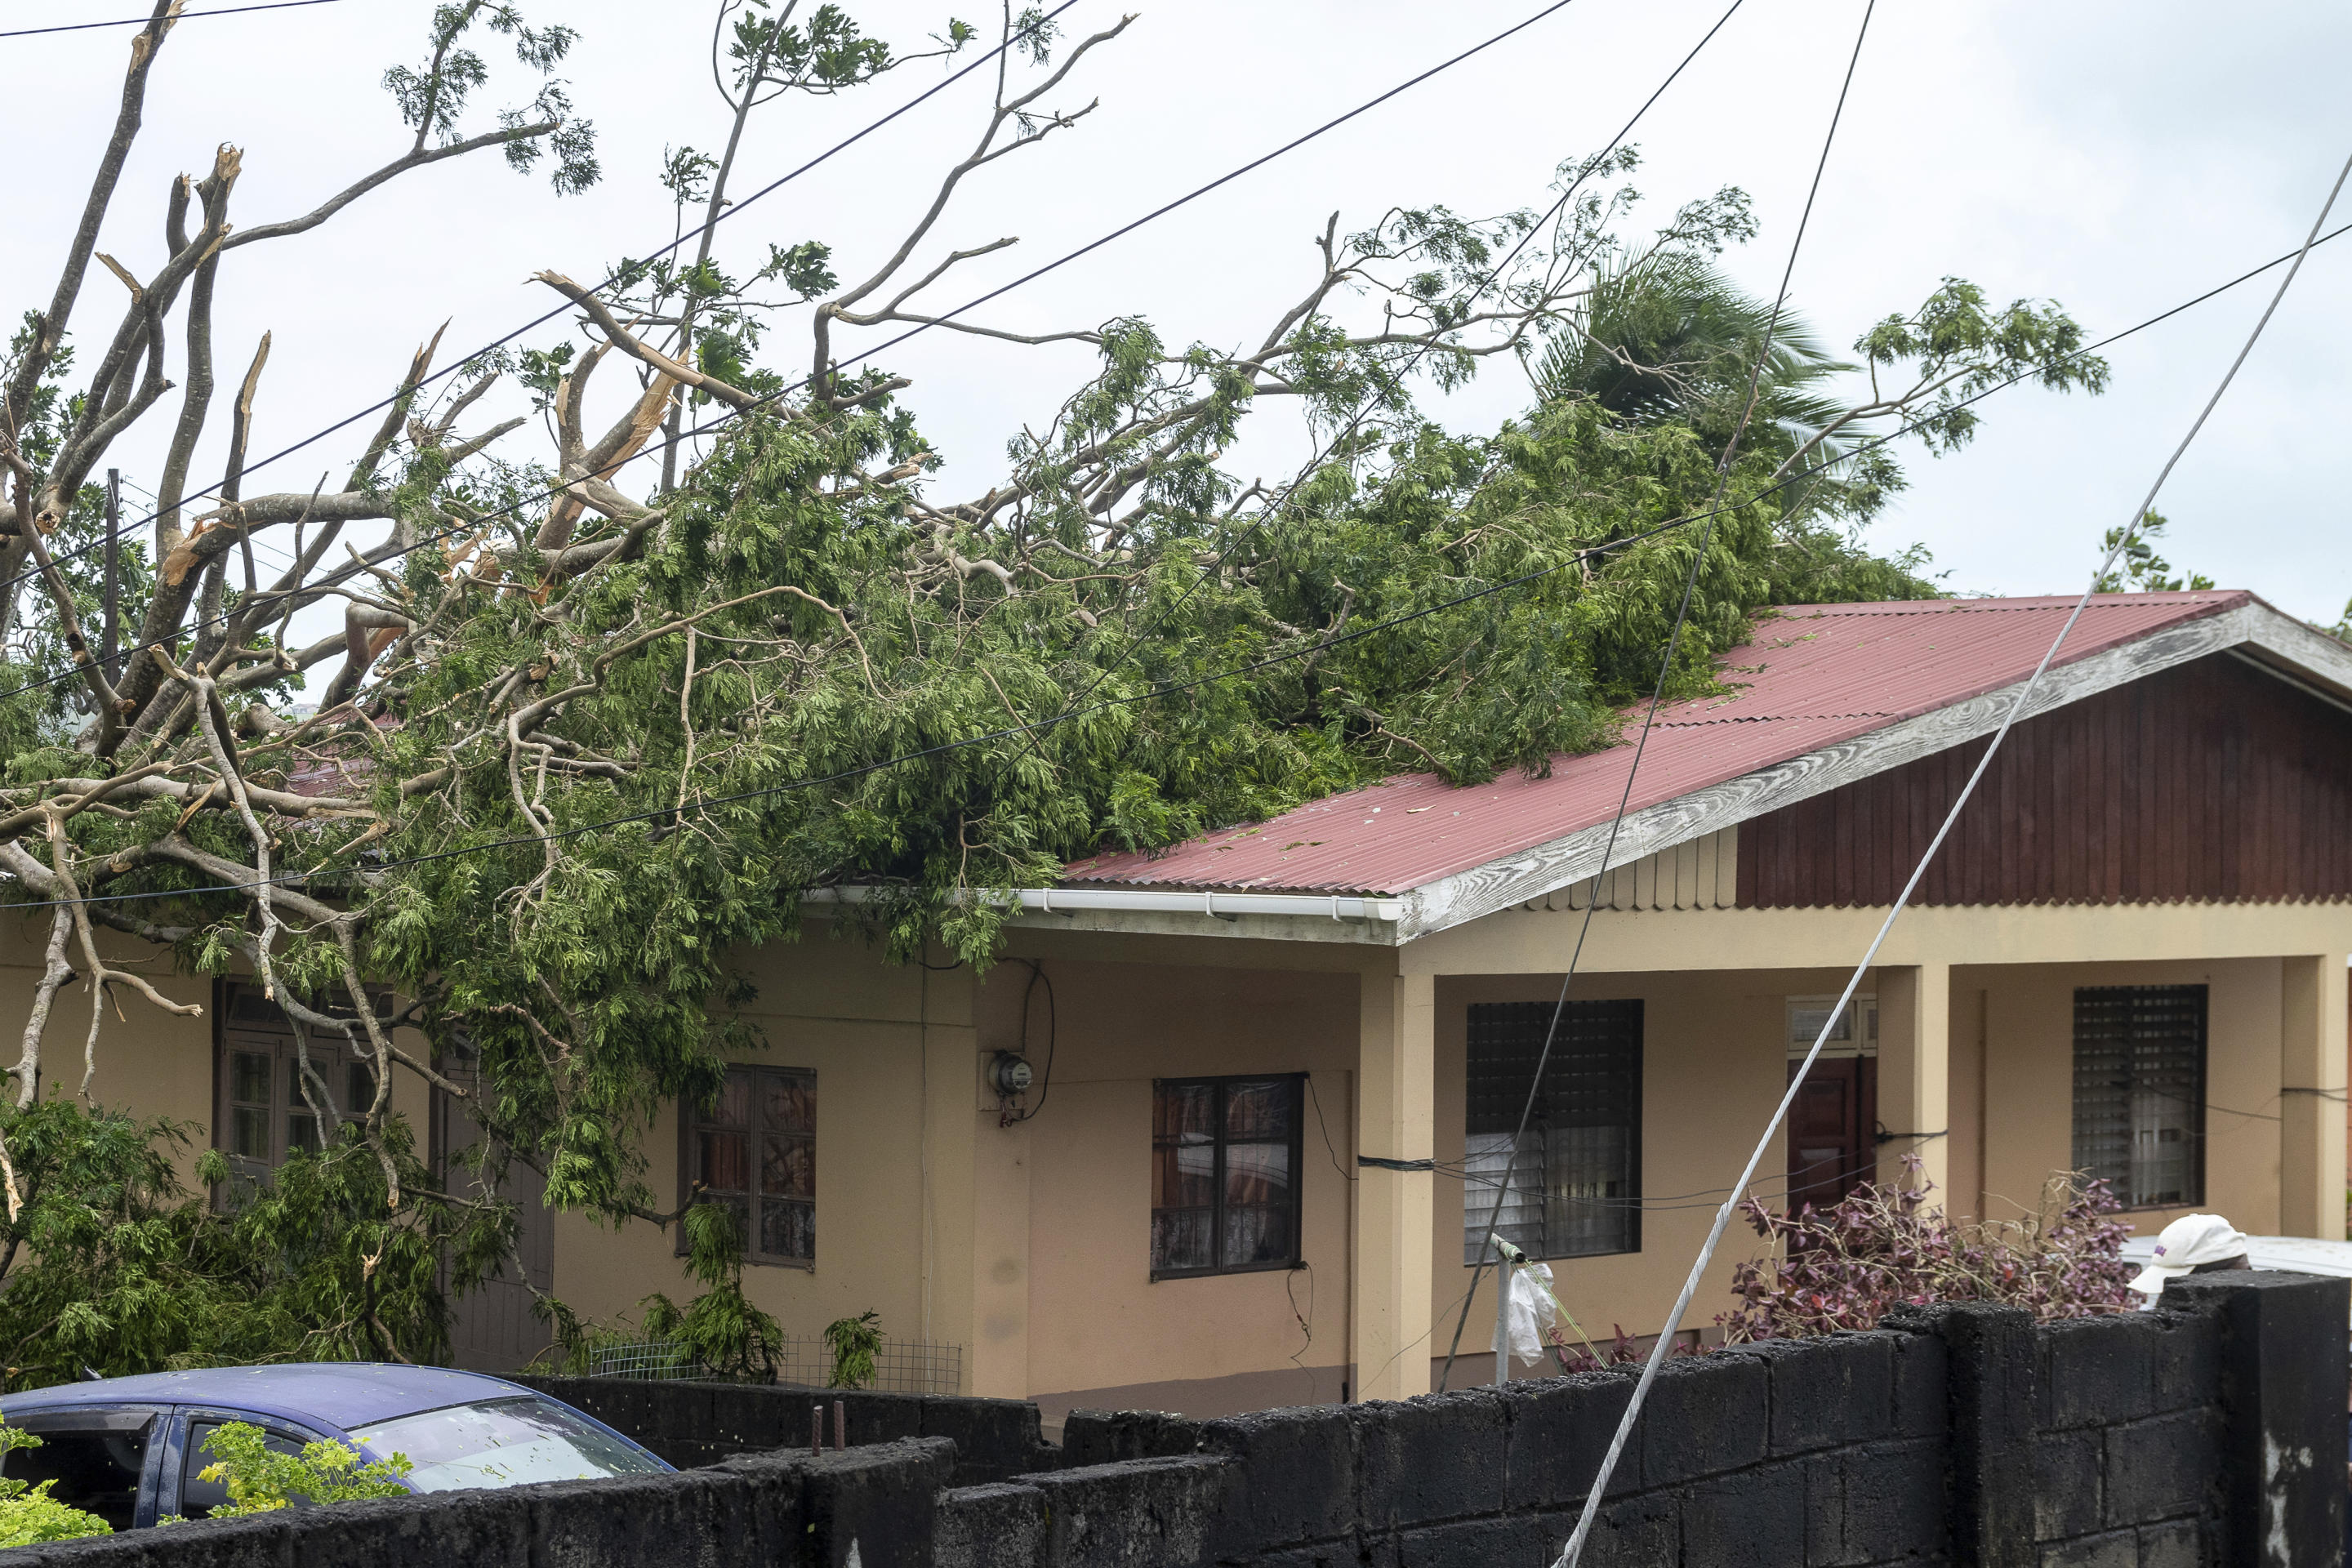 A tree lies on the roof of a house in Kingstown, the capital of Saint Vincent and the Grenadines.